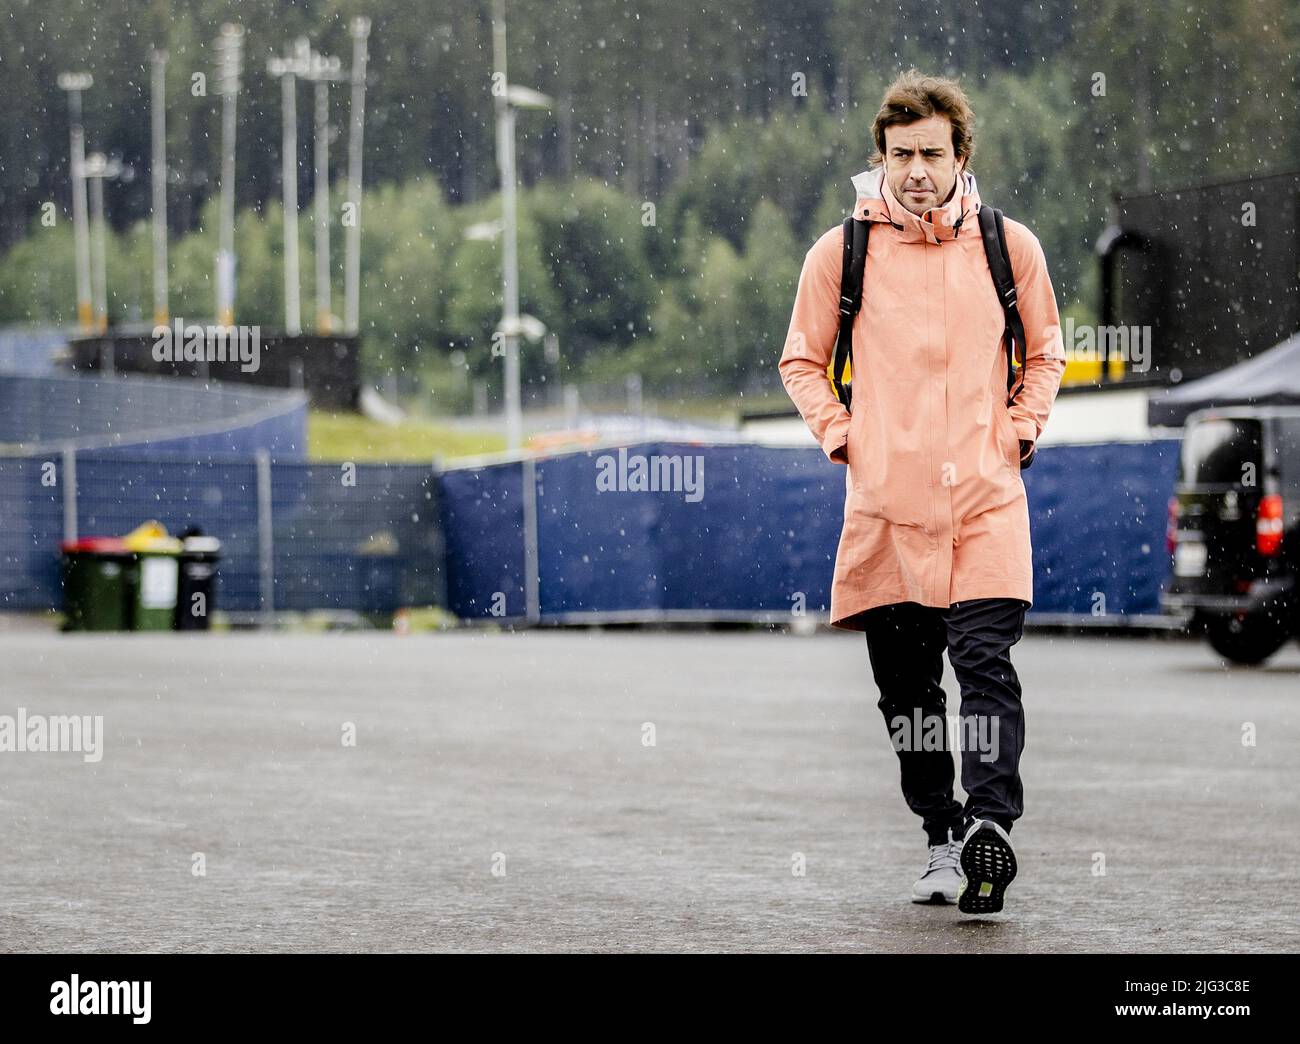 Spielberg, Austria. 7th July, 2022. SPIELBERG - Fernando Alonso (Alpine) arrives at the Red Bull Ring race track ahead of the Austrian Grand Prix. Credit: SEM VAN DER WAL /ANP/Alamy Live News Credit: ANP/Alamy Live News Stock Photo